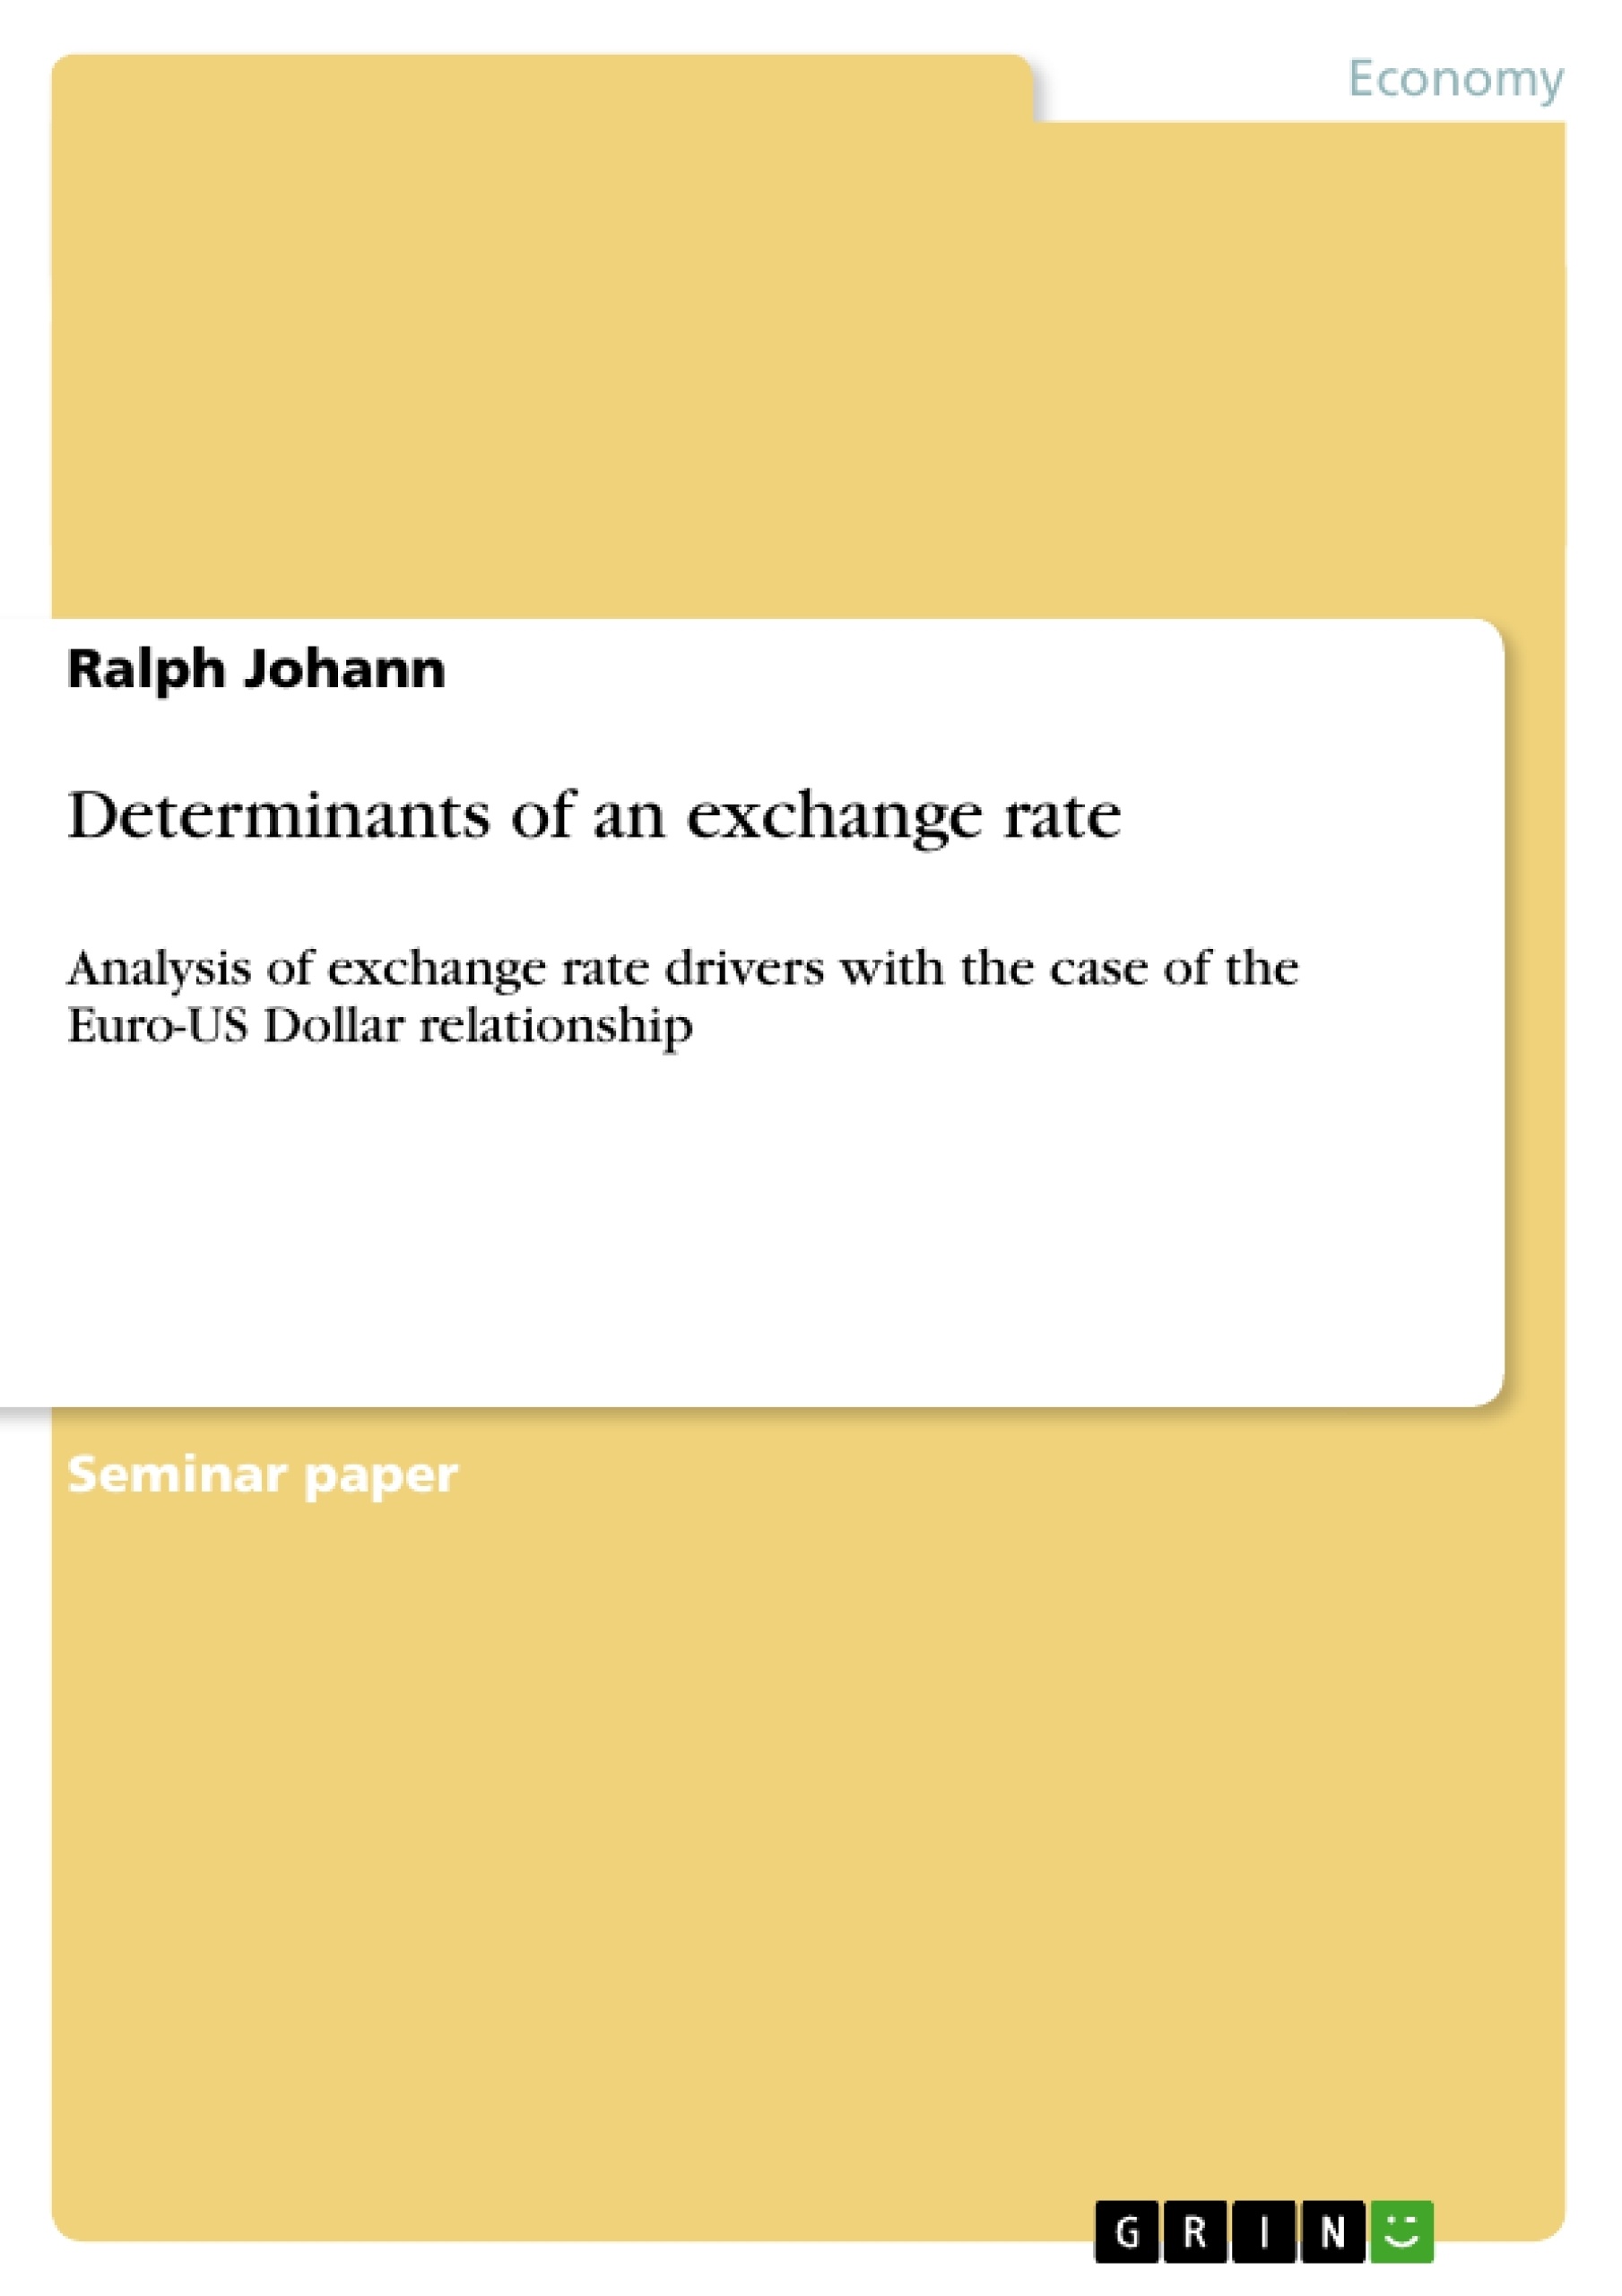 Essay on Foreign Exchange Market in India